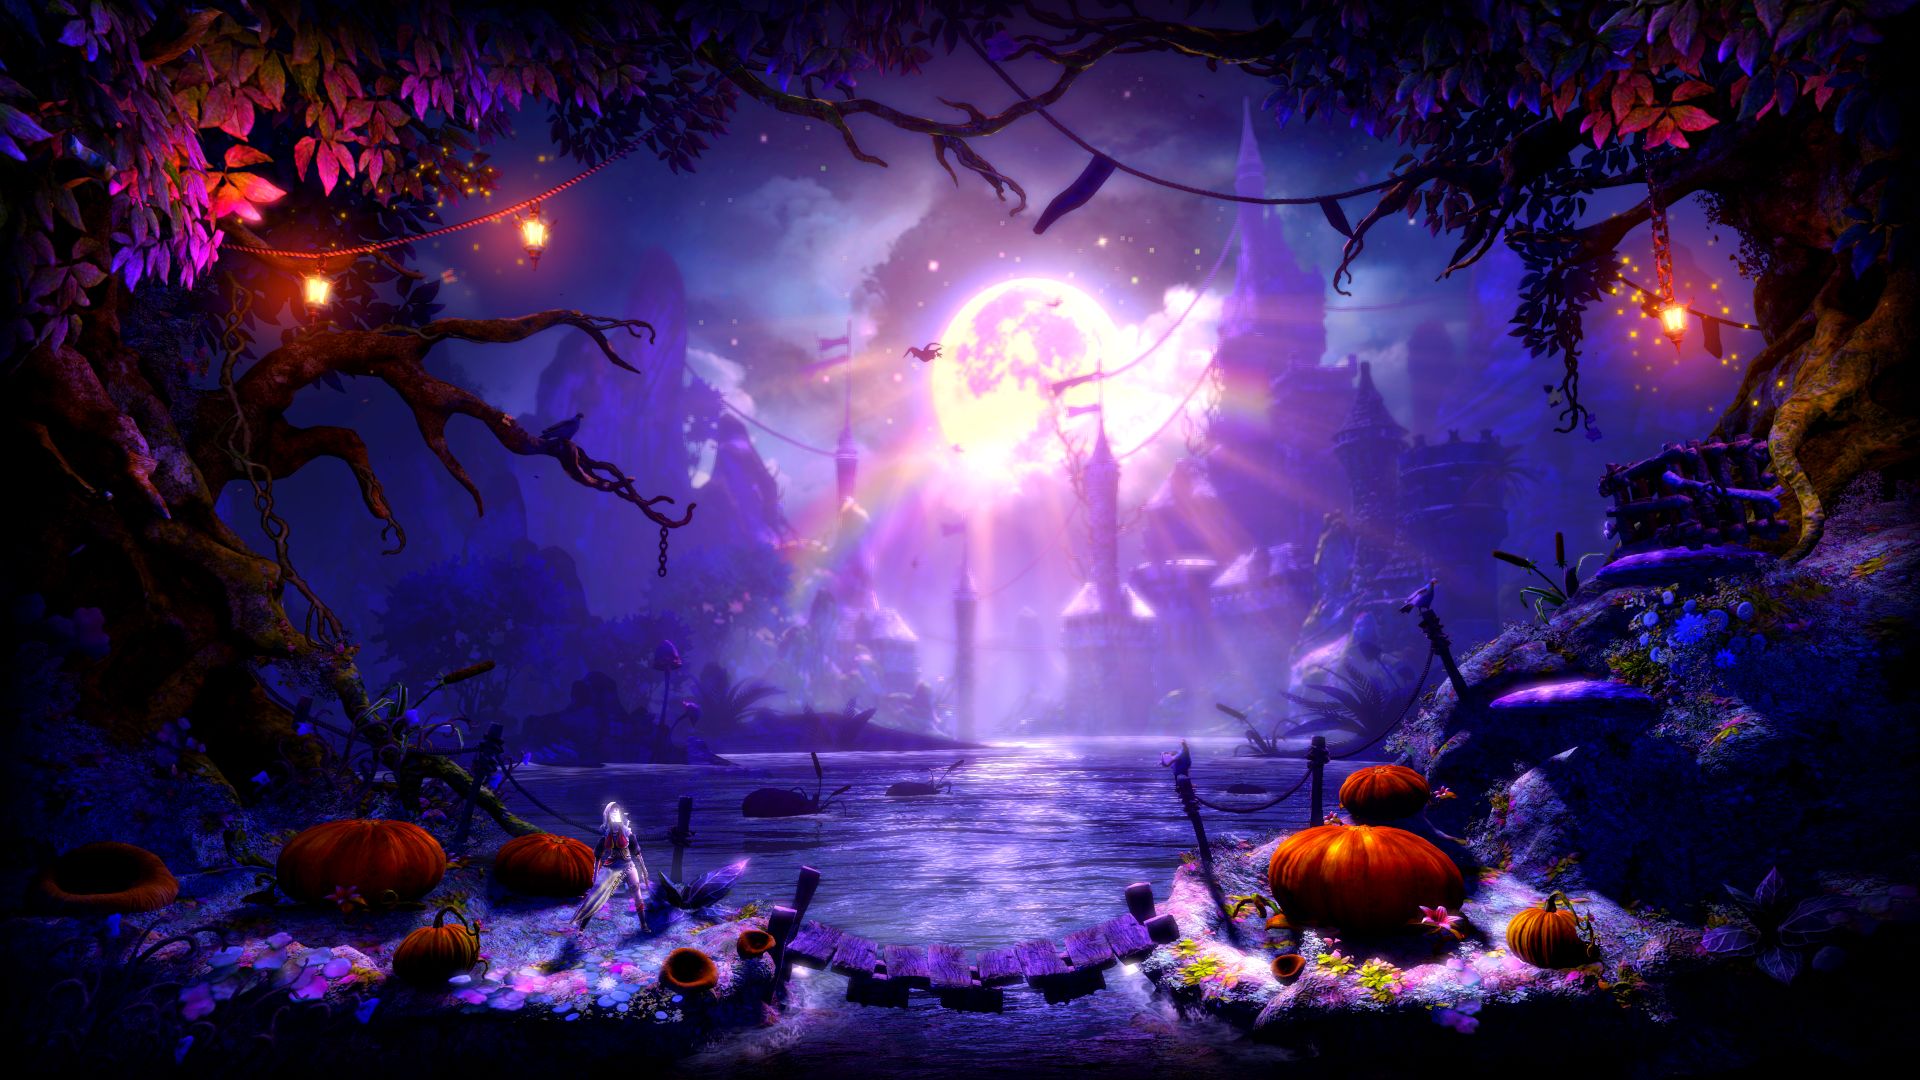 universe free themes tumblr HD Full  Halloween  and Wallpaper 1920x1080 Background